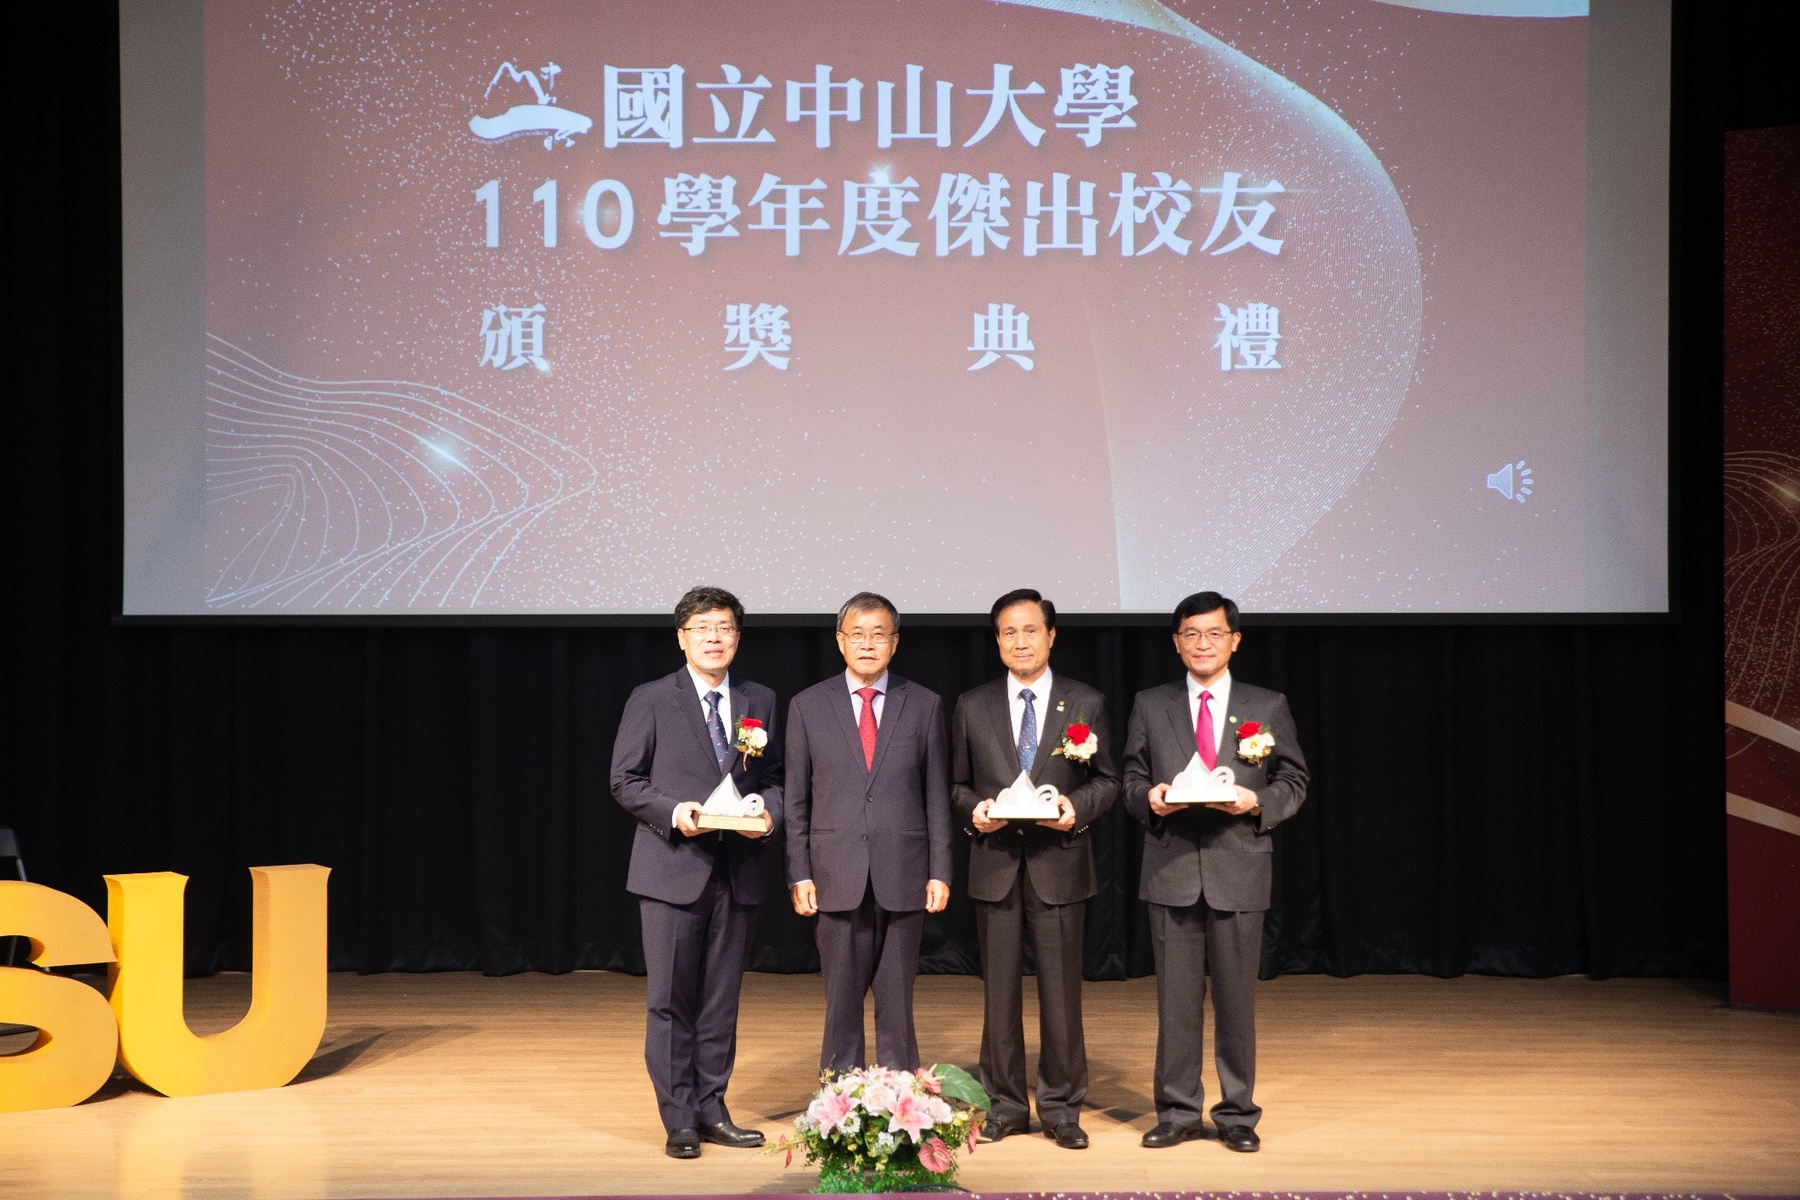 NSYSU President Ying-Yao Cheng (second from the left) with Outstanding Alumni on stage.